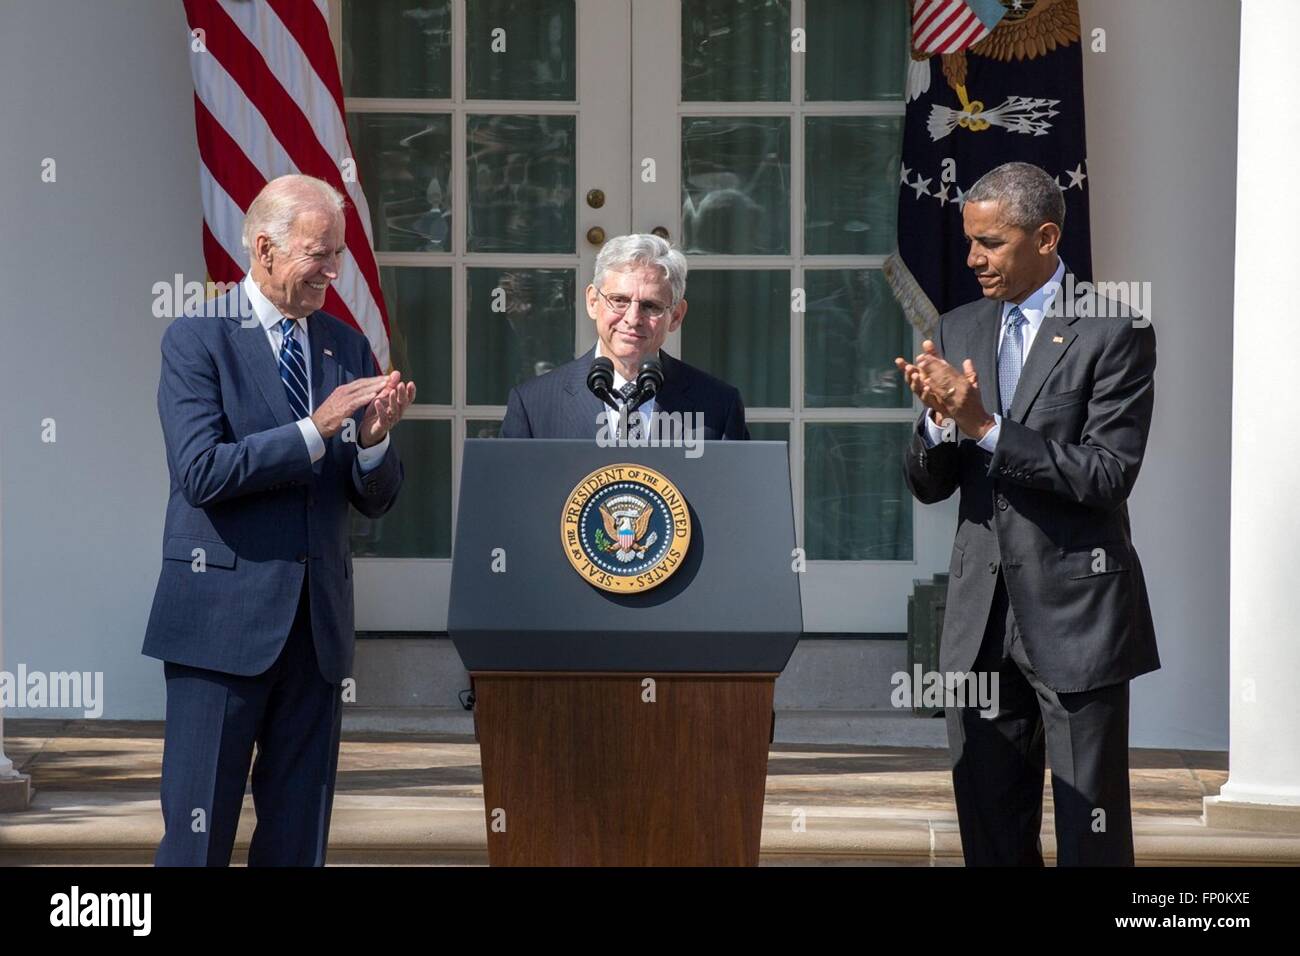 Washington DC, USA. 16th March, 2016. U.S. President Barack Obama and Vice President Joe Biden applaud as Chief Judge Merrick B. Garland accepts the nomination to the United States Supreme Court in the Rose Garden at the White House March 16, 2016 in Washington, DC. Stock Photo